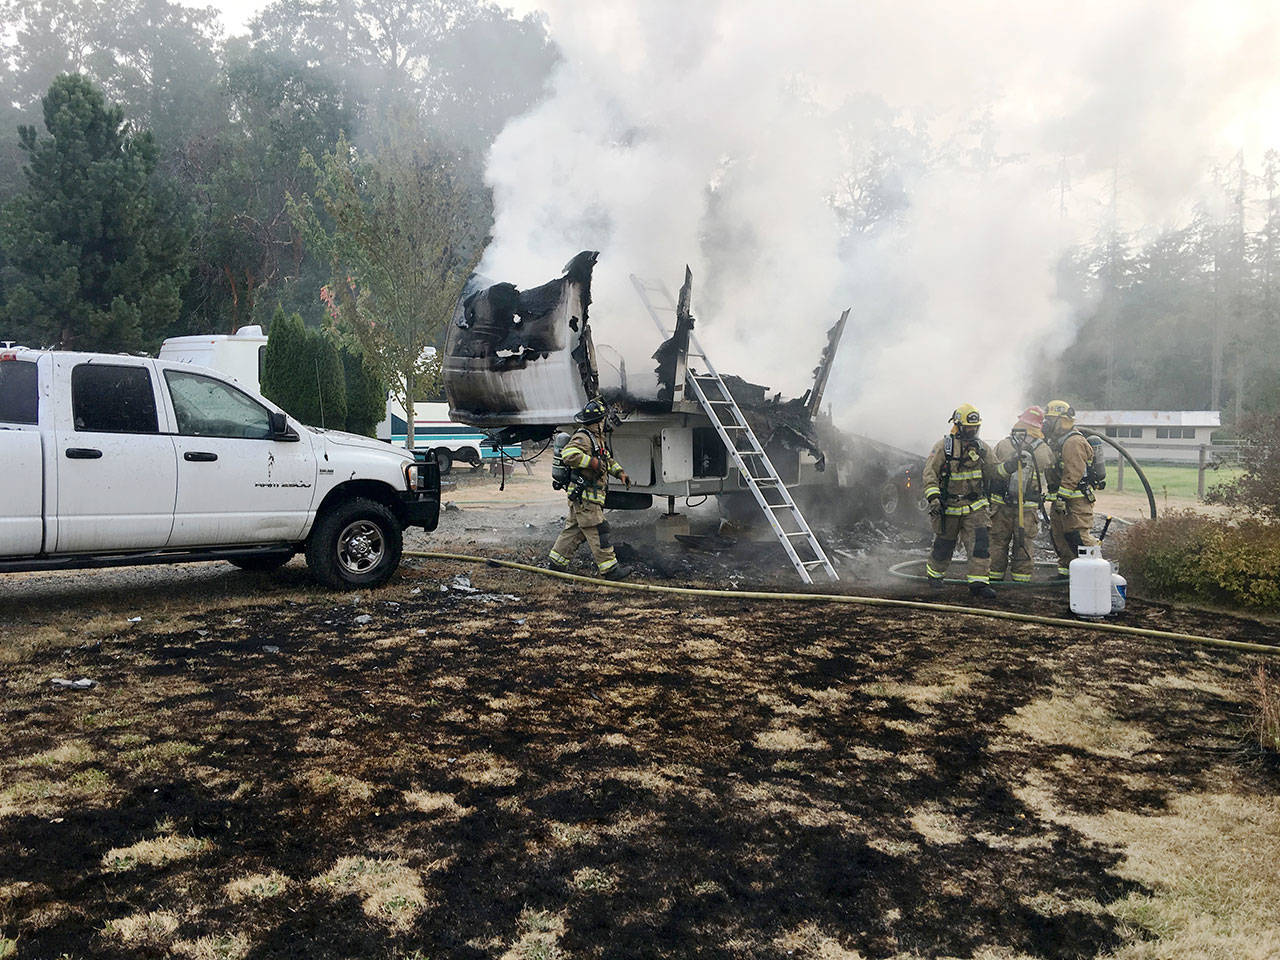 Crews from East Jefferson Fire Rescue were among those responding to a fatal early morning fire Saturday on Marrowstone Island. (Bill Beezley/EJFR)